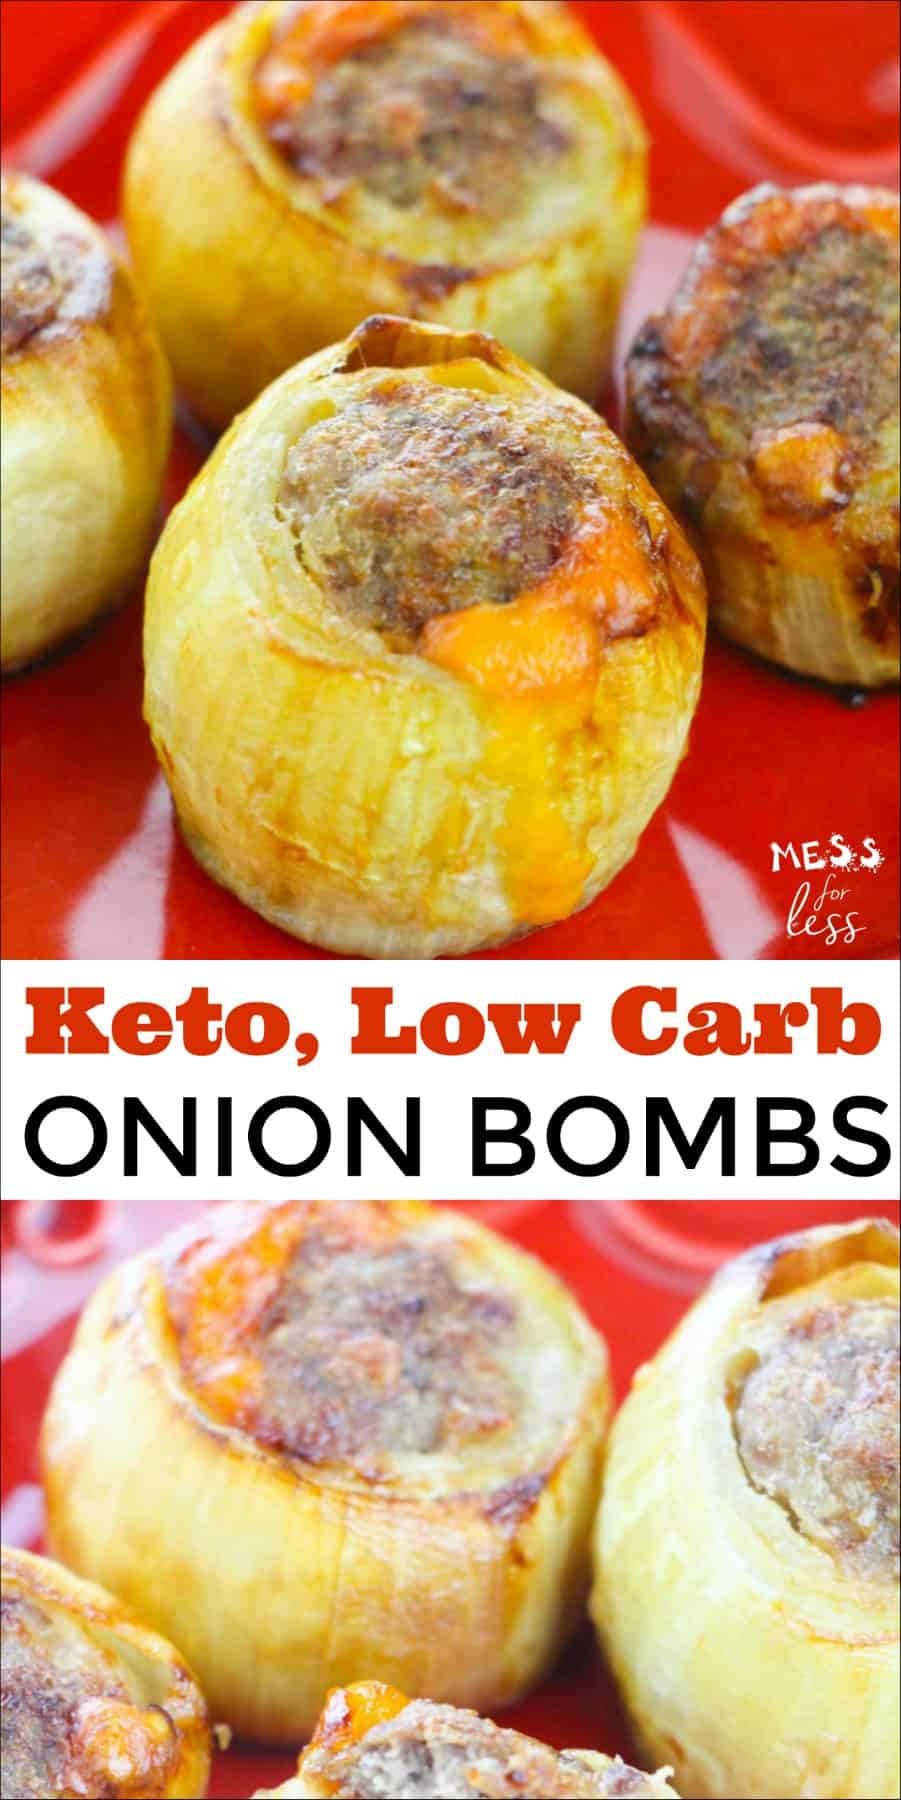 If you are on a Keto or low carb diet, then you may have heard of Keto Onion Bombs. The meat turns out perfectly cooked and cheesy, while the onions are crisp and full of flavor. #keto #lowcarb #ketorecipes #onionbombs #lowcarbrecipes